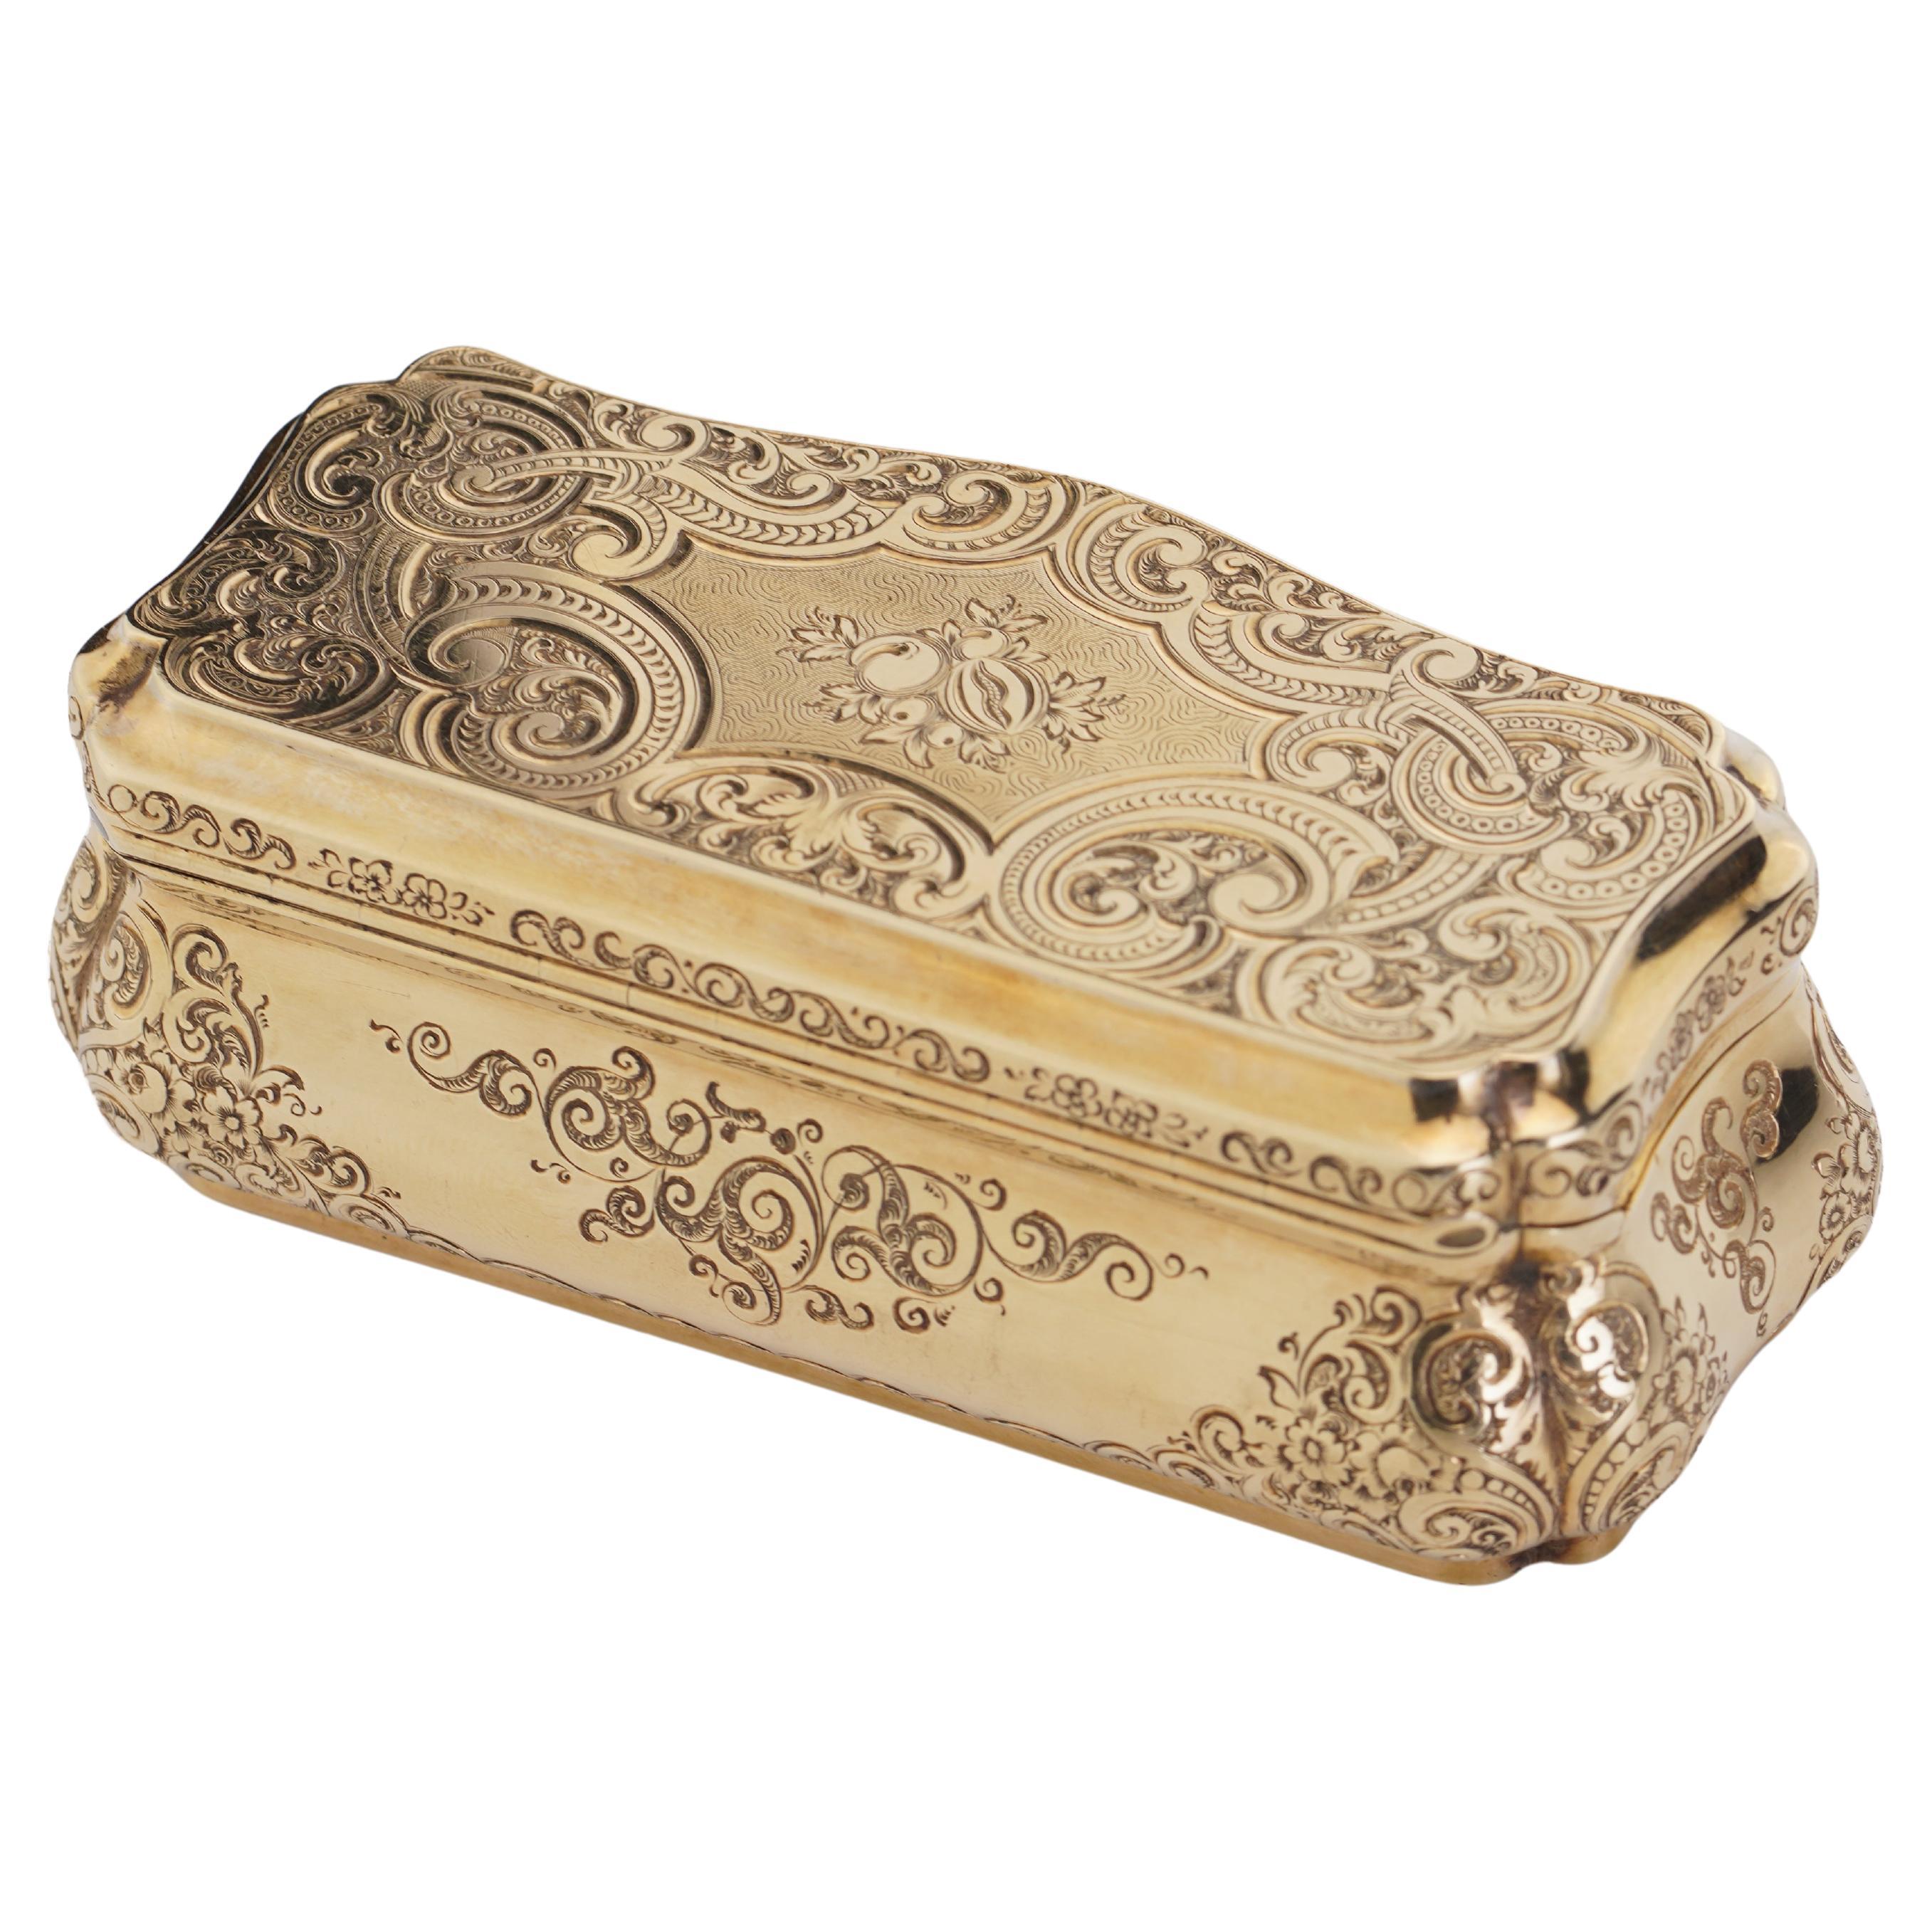 Antique German 14kt. yellow gold snuff - box by Carl Martin Weishaupt & Sons. 